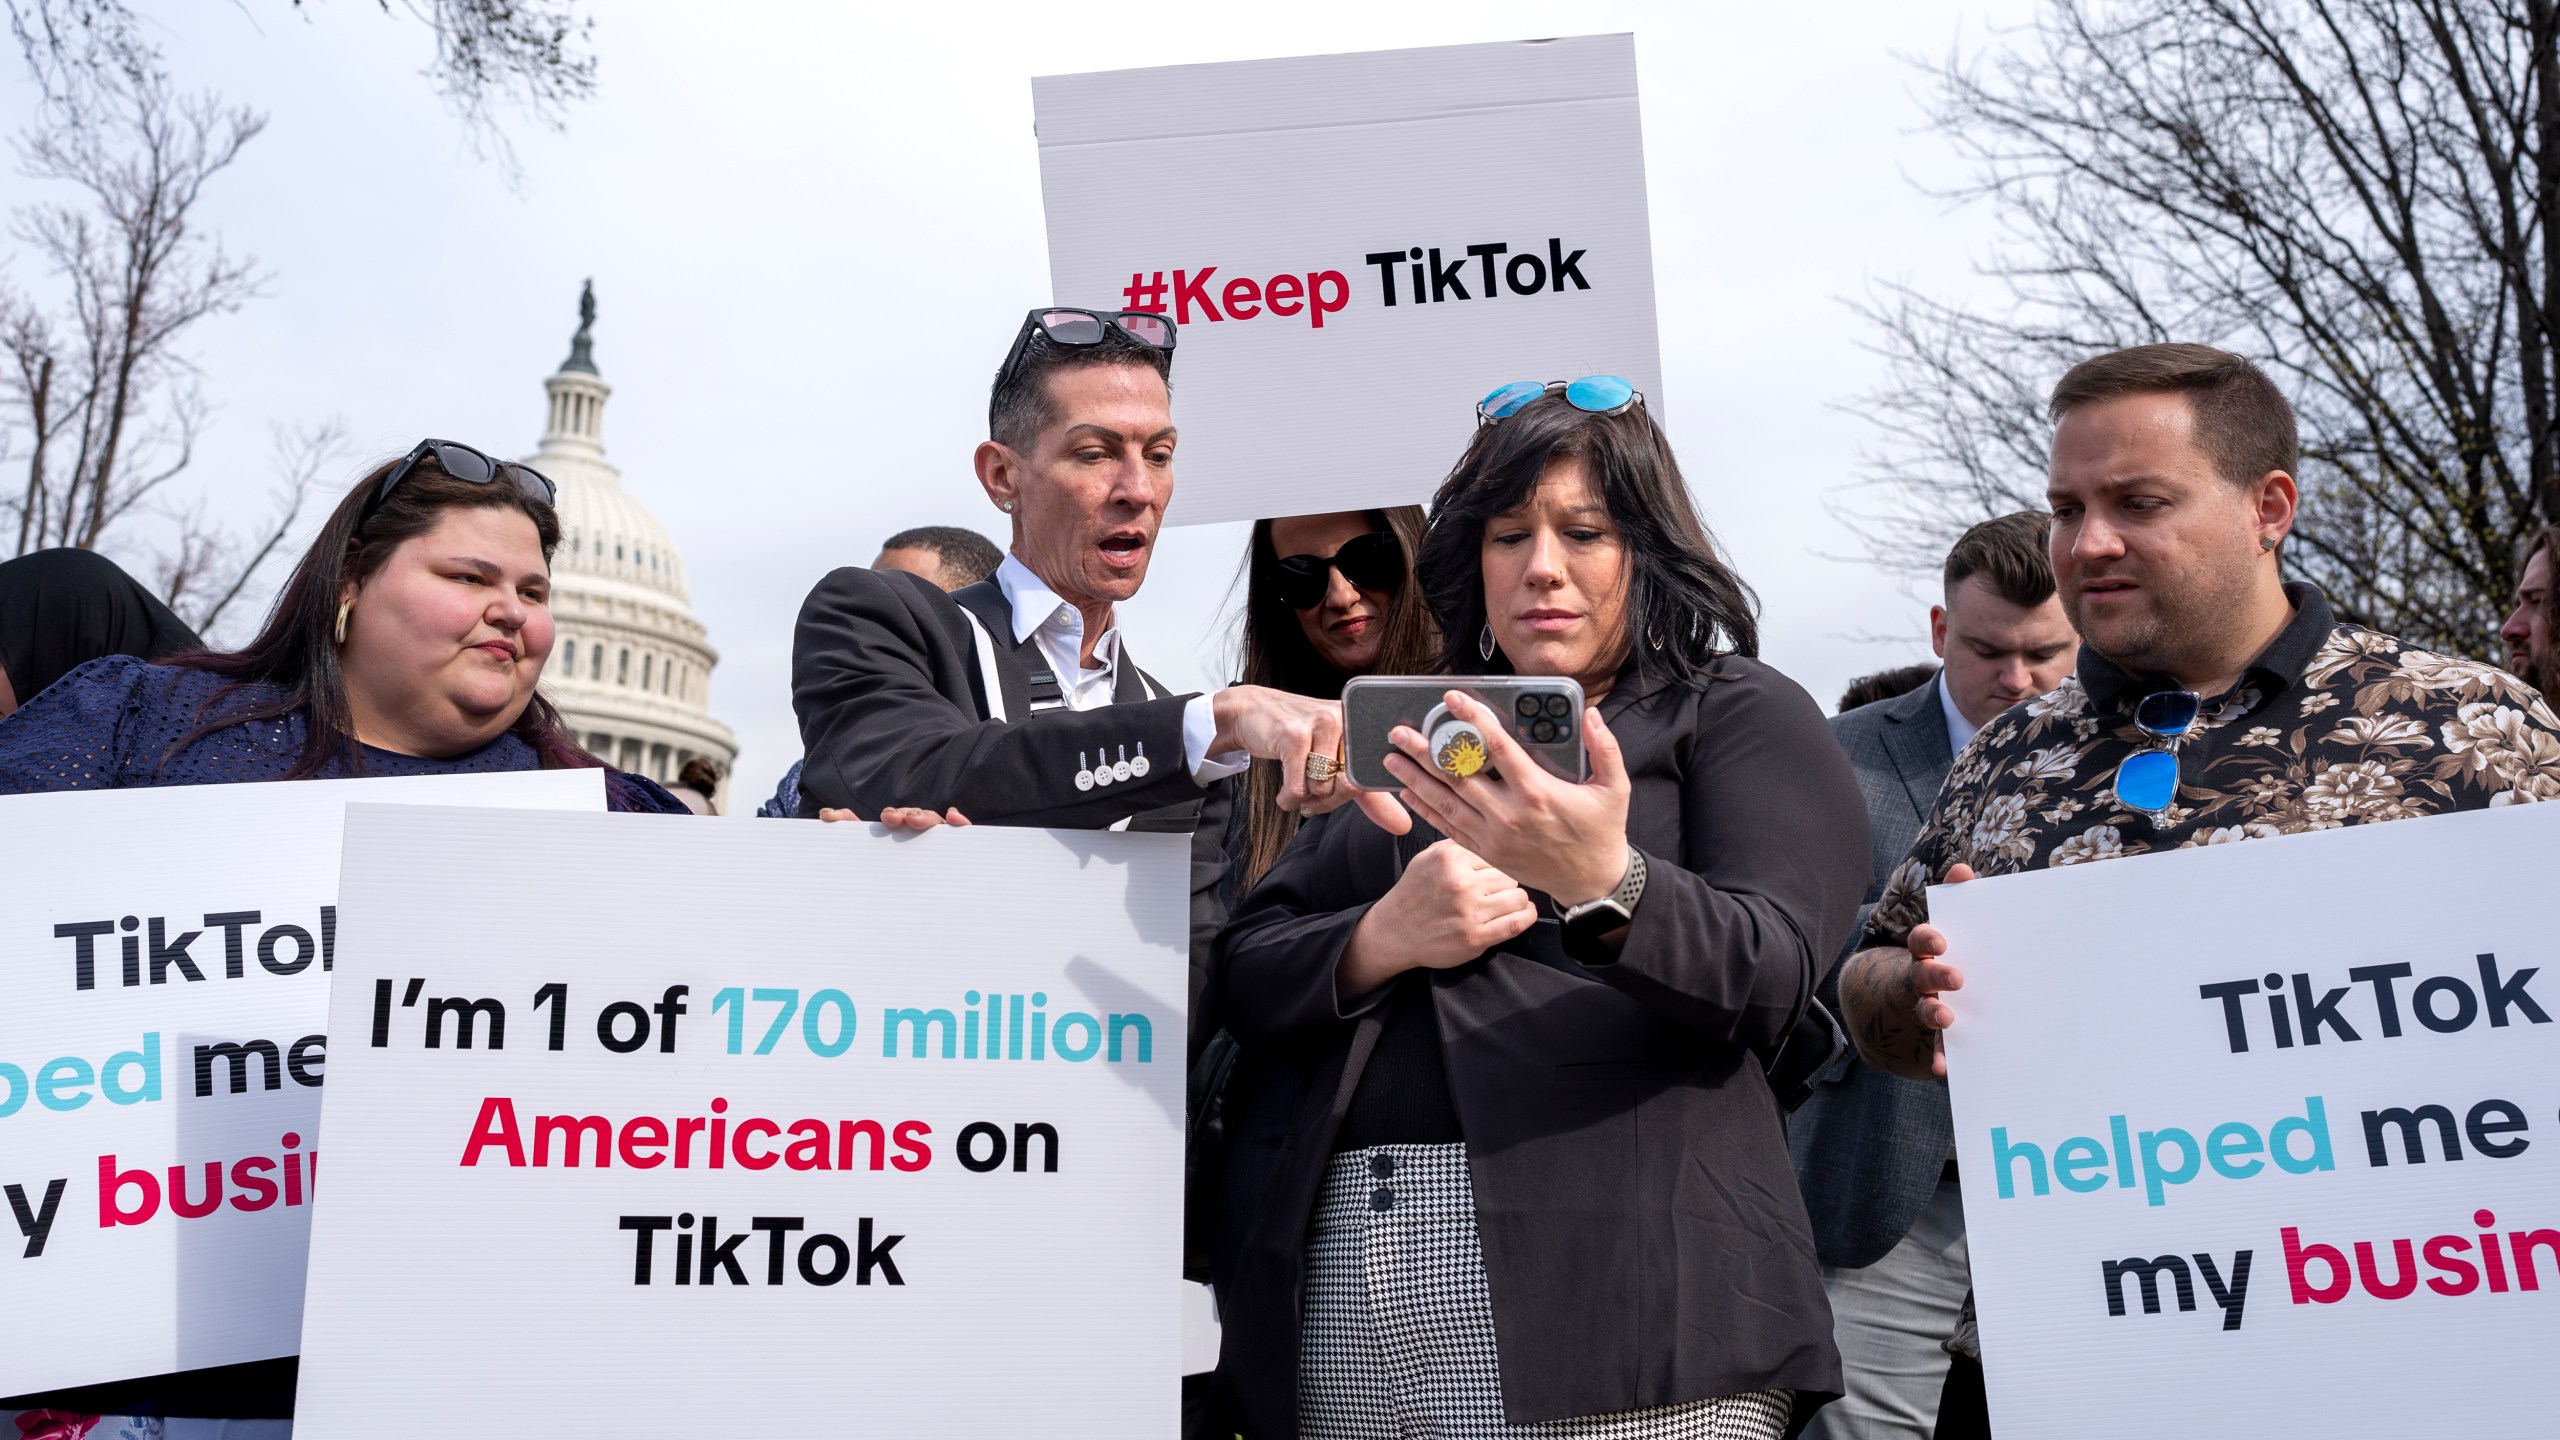 Devotees of TikTok monitor voting at the Capitol in Washington, as the House passed a bill that would lead to a nationwide ban of the popular video app if its China-based owner doesn't sell, Wednesday, March 13, 2024. Lawmakers contend the app's owner, ByteDance, is beholden to the Chinese government, which could demand access to the data of TikTok's consumers in the U.S. (AP Photo/J. Scott Applewhite)